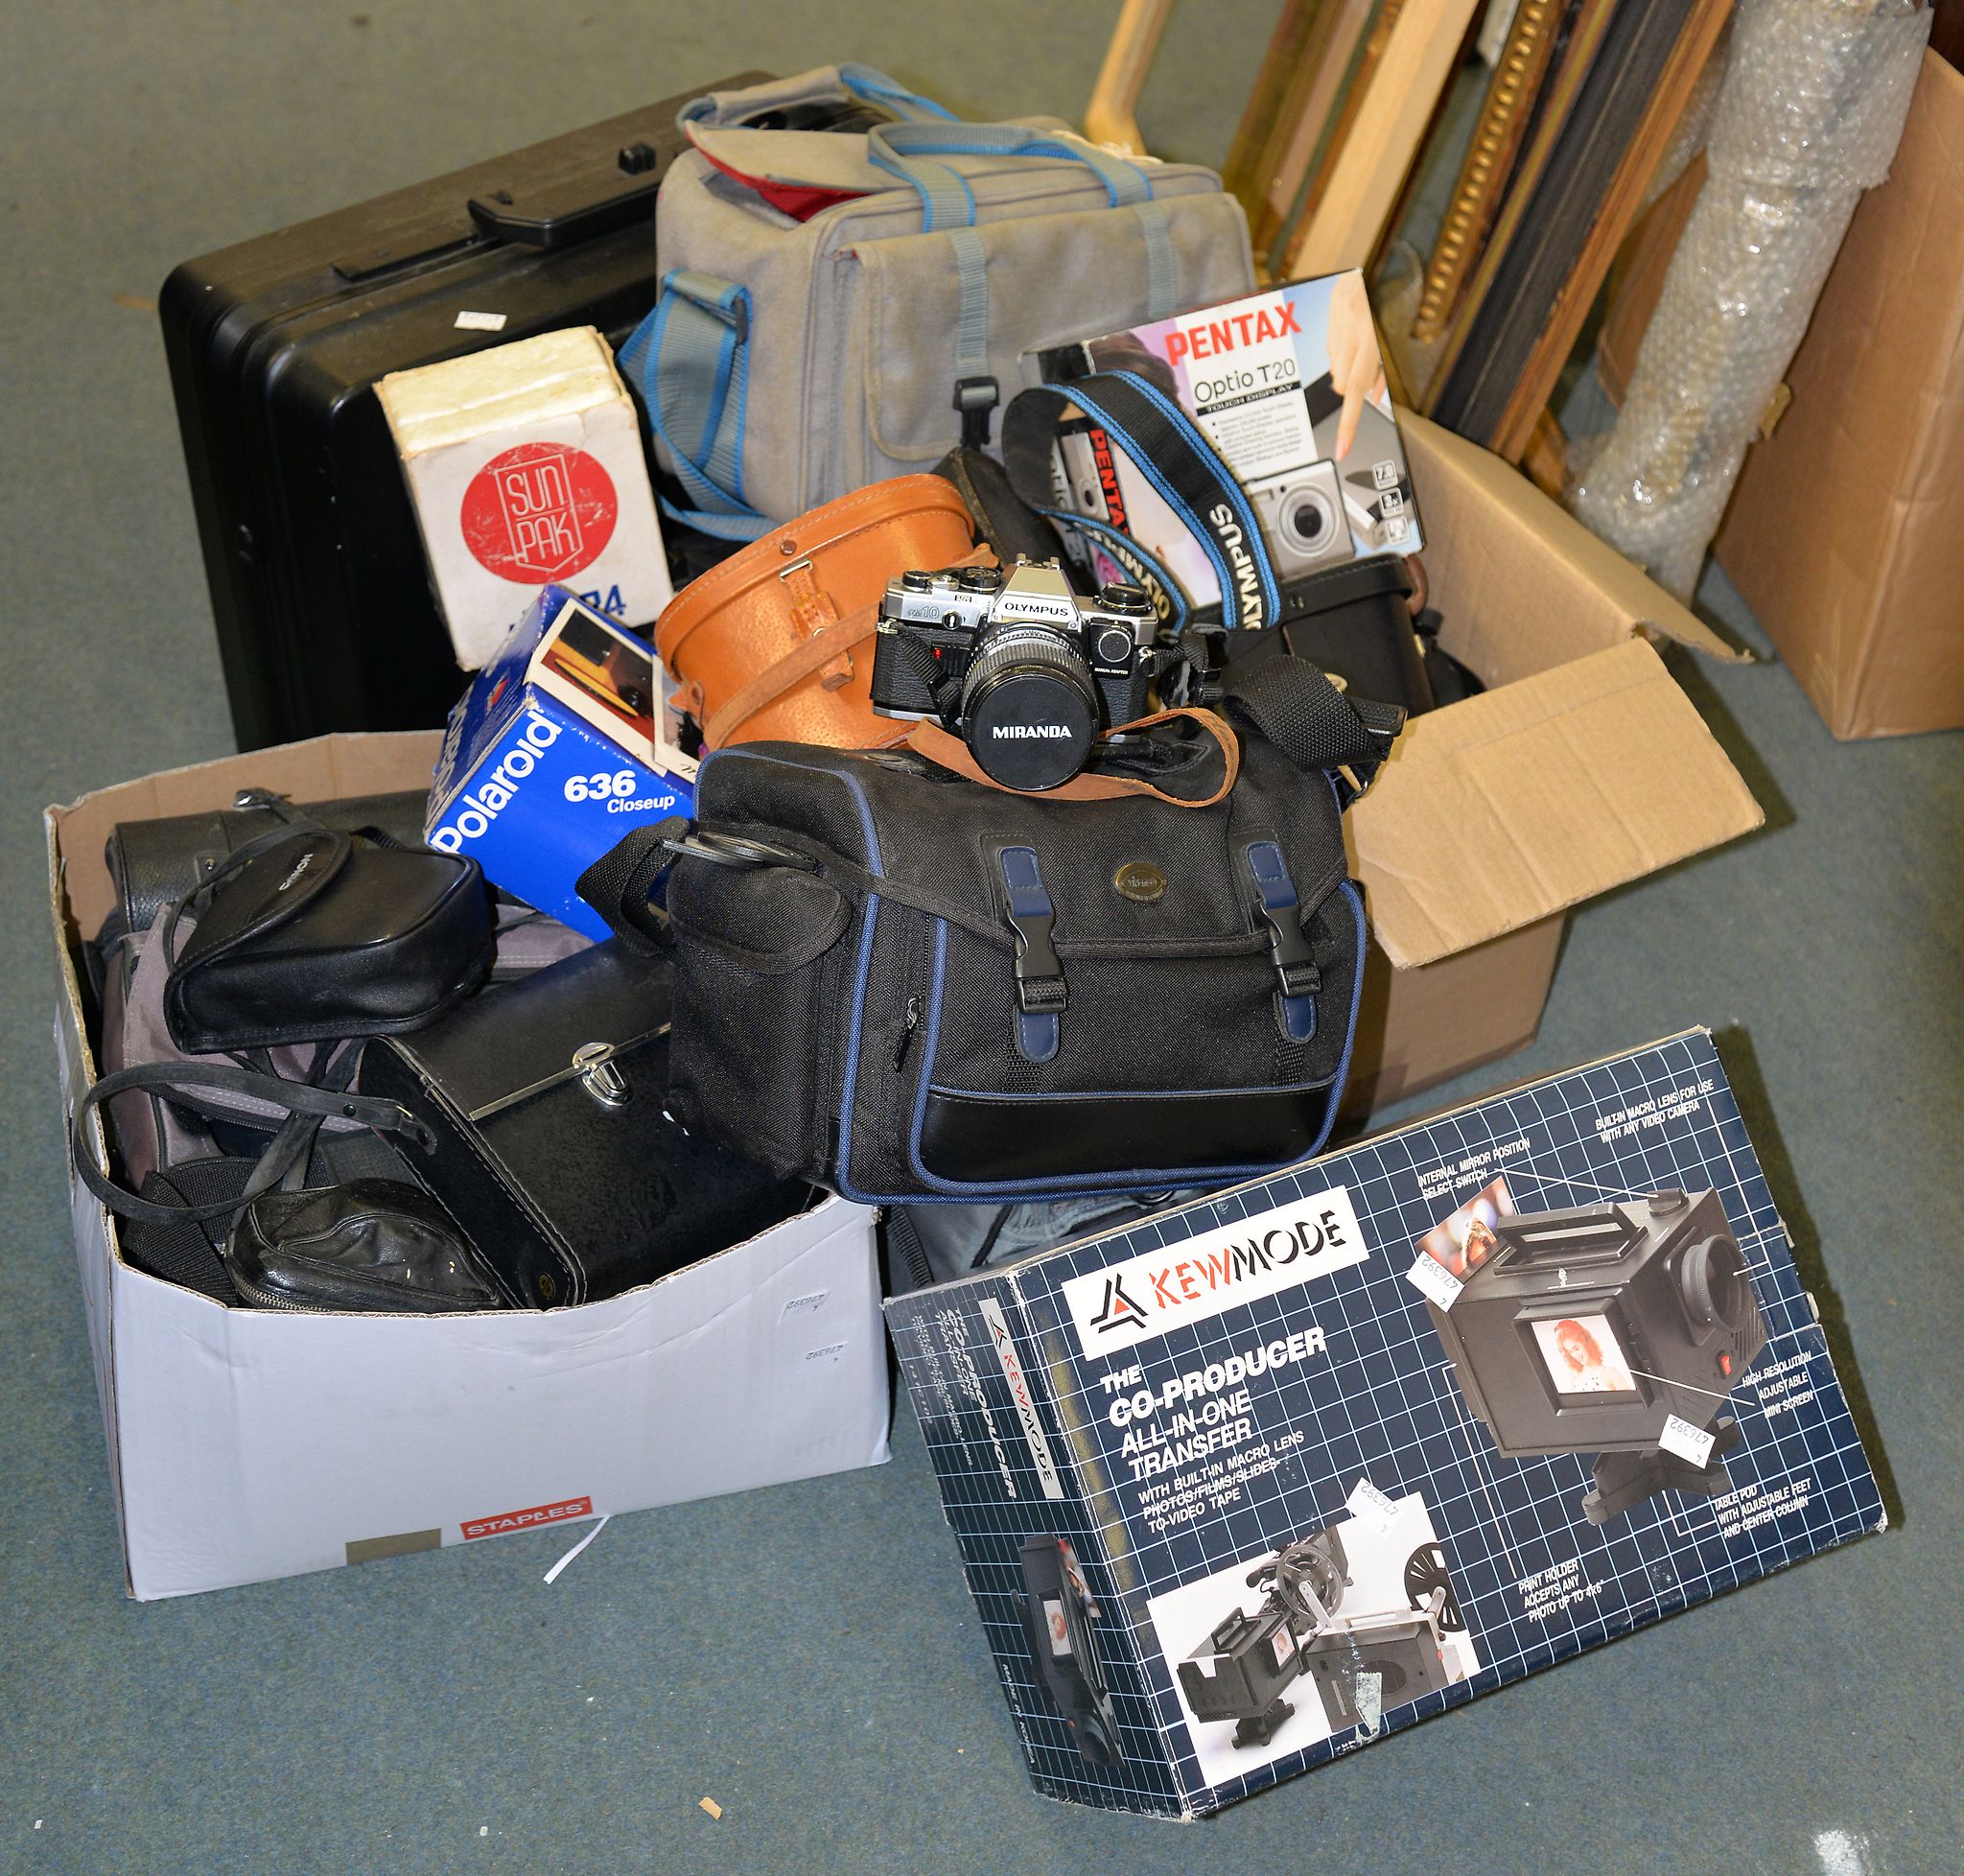 A collection of various cameras, video recording equipment, and field glasses, including an